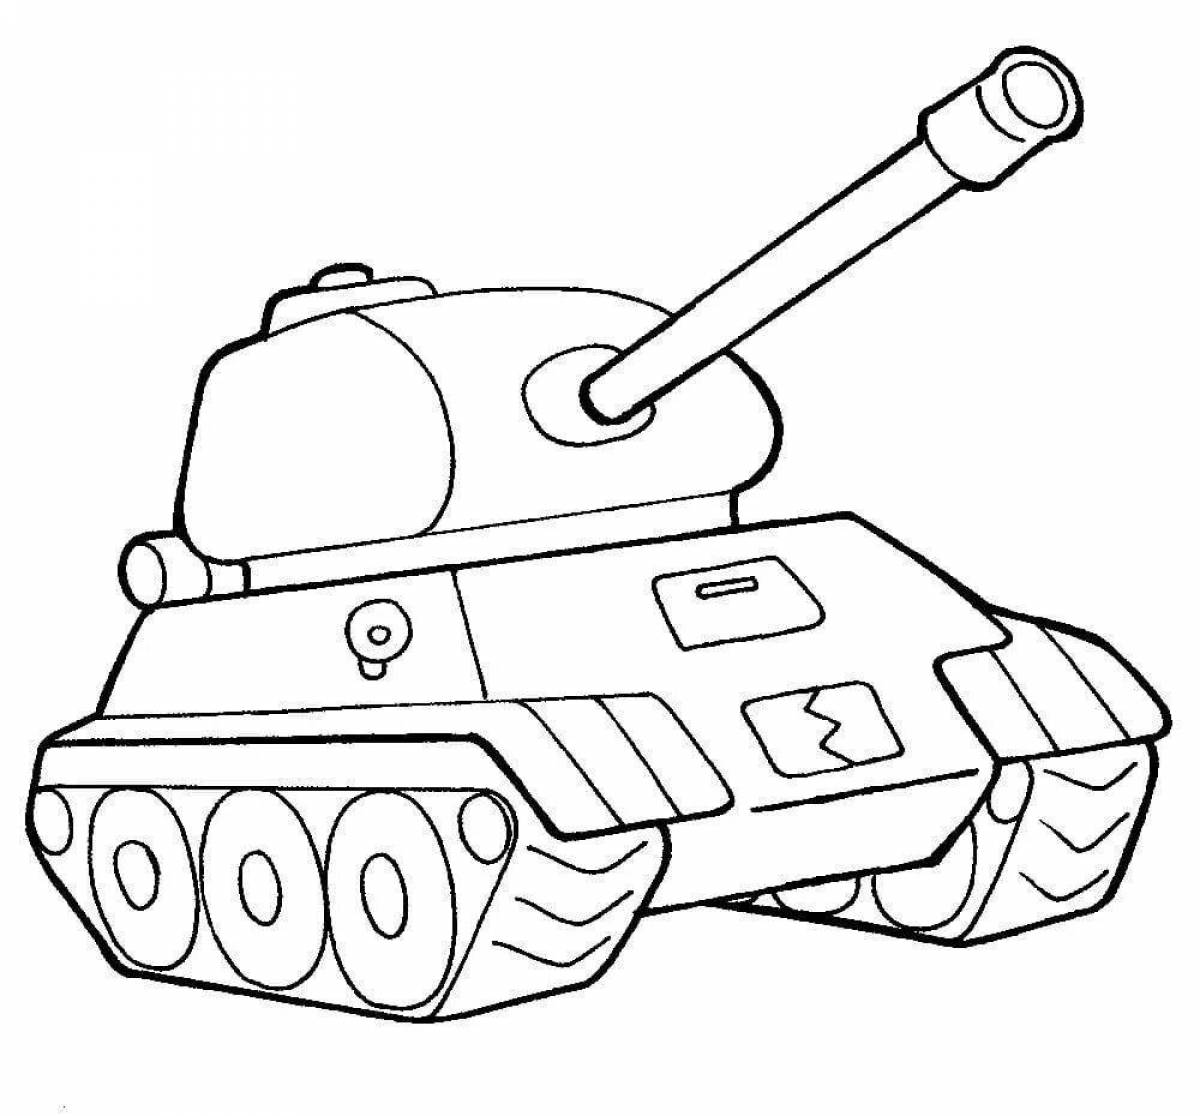 Tank for 5 year olds #8